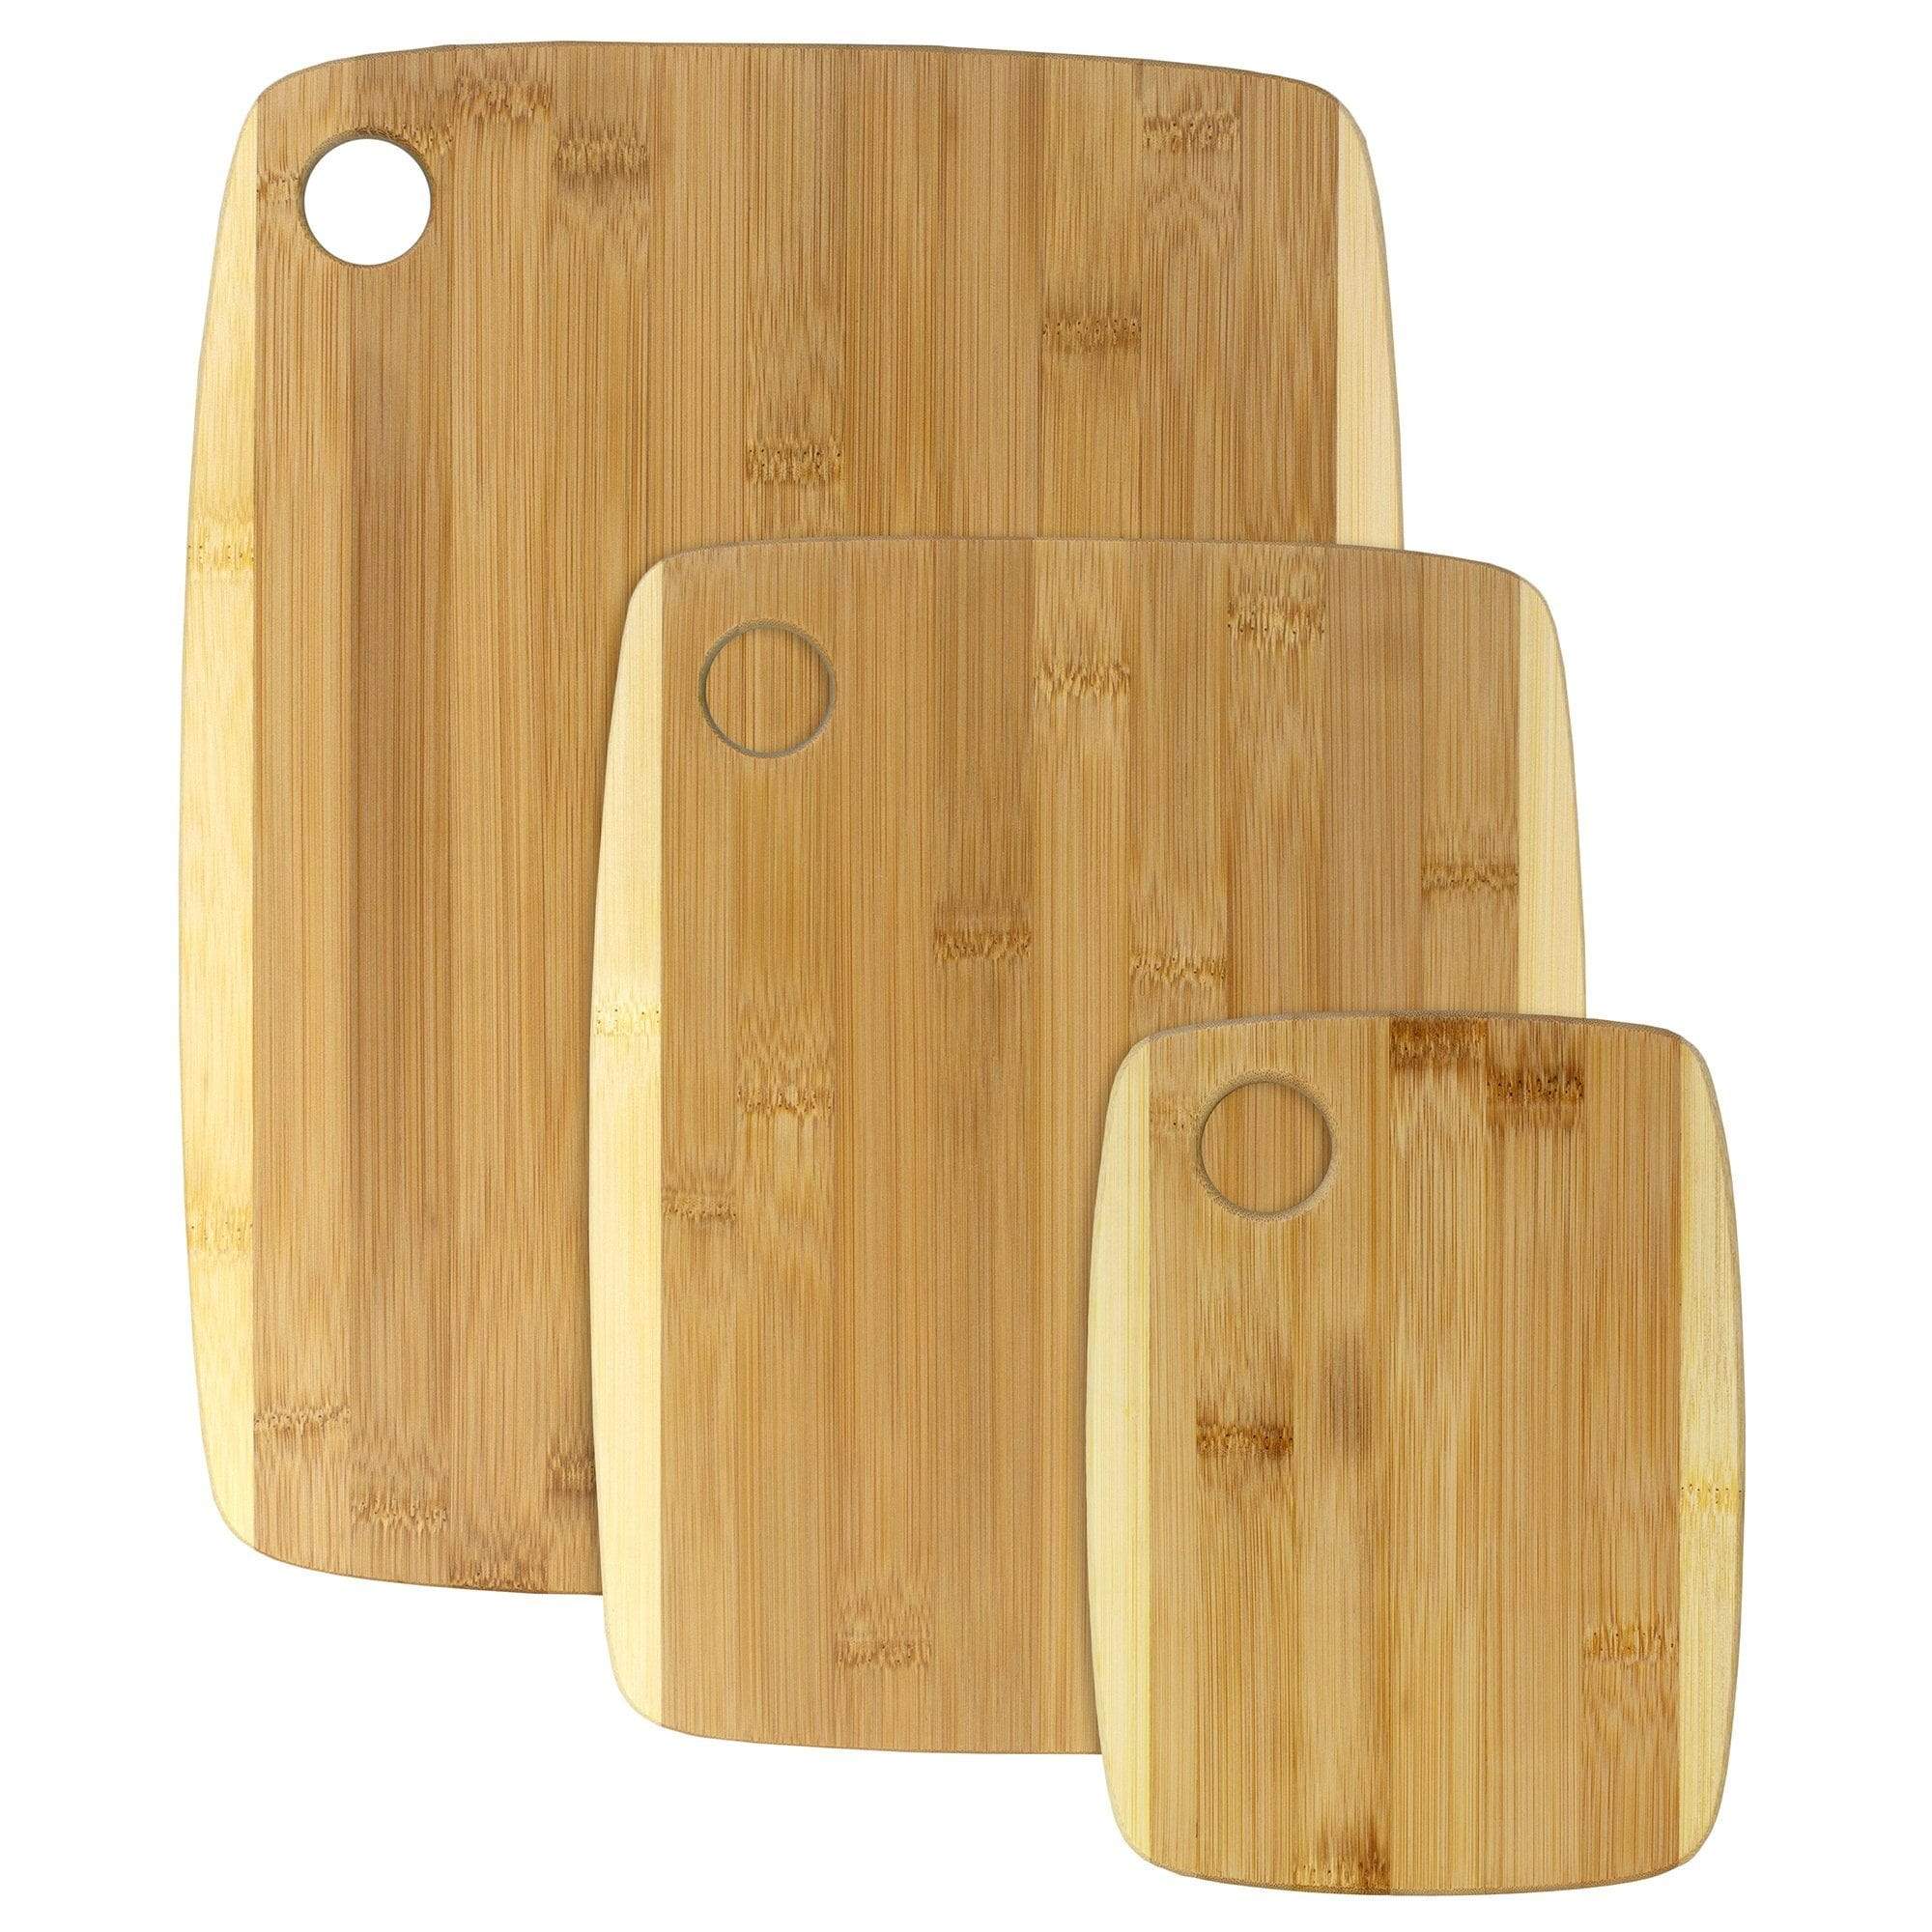 https://totallybamboo.com/cdn/shop/products/3-piece-two-tone-bamboo-serving-and-cutting-board-set-totally-bamboo-290635.jpg?v=1628120214